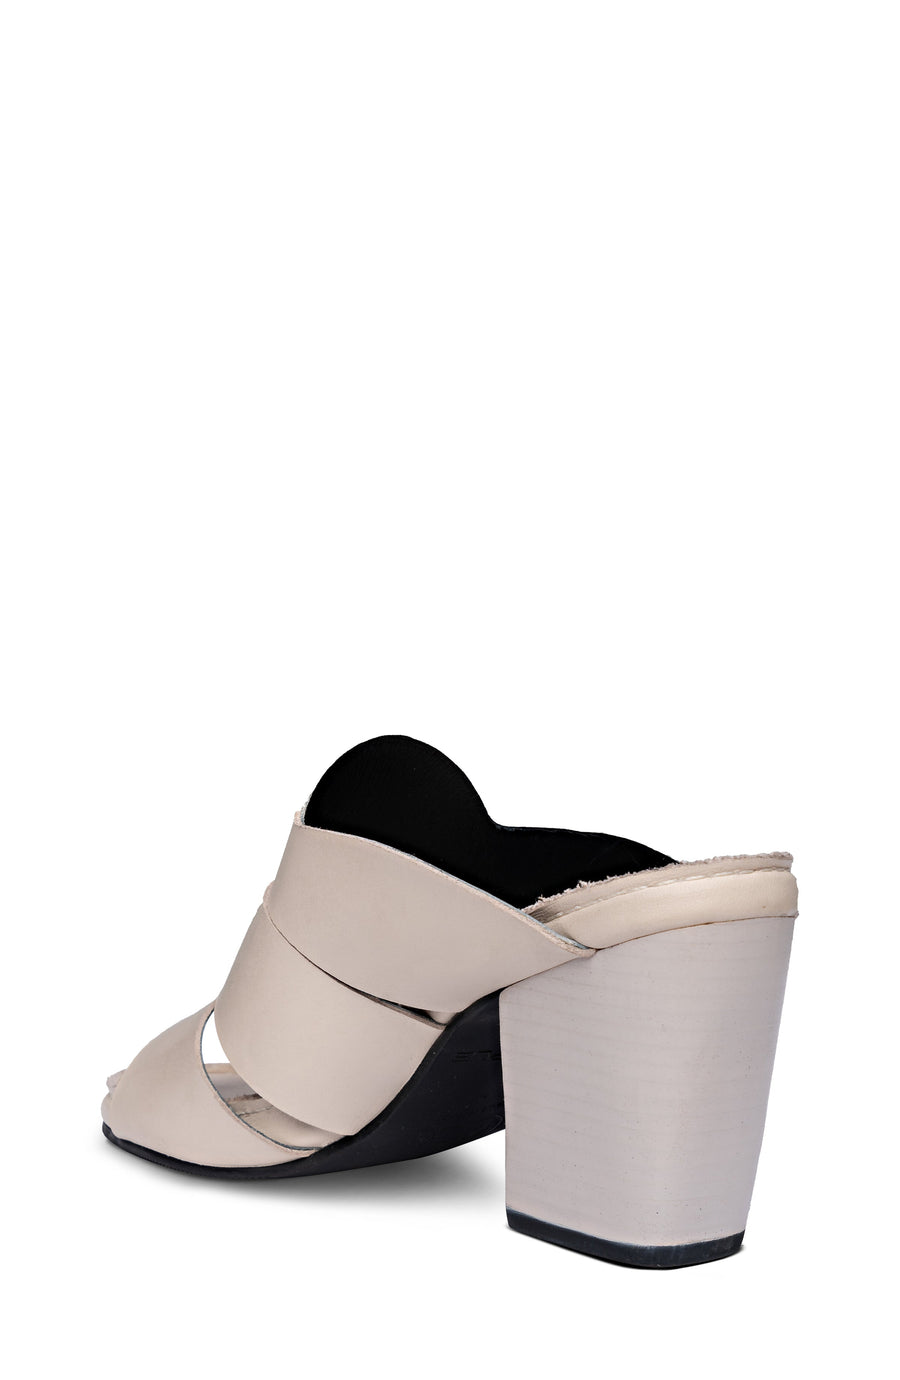 Golo Seamingly Soy Leather Strapped Heel Sandals - gilt+gossamer